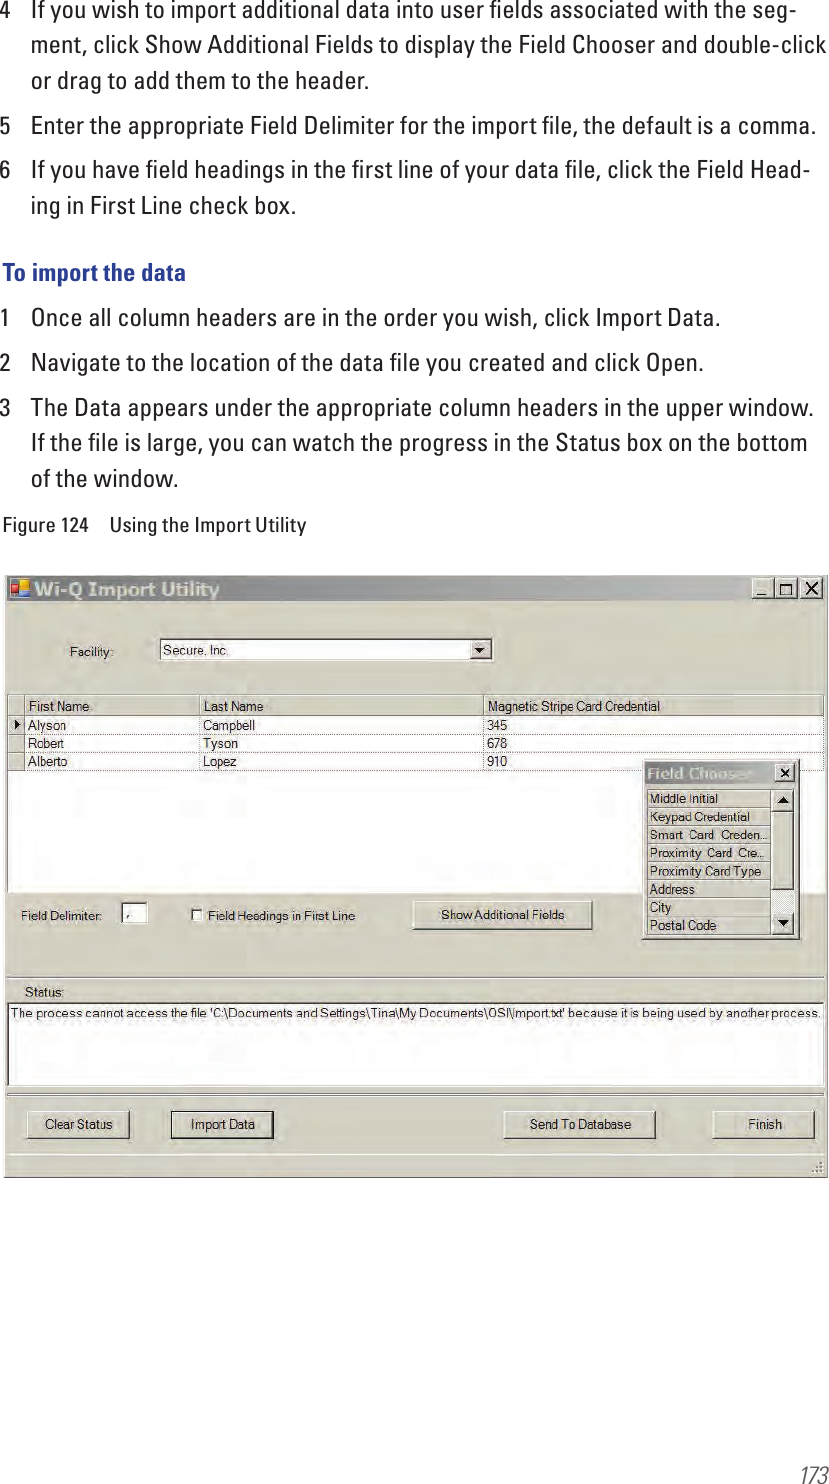 1734  If you wish to import additional data into user ﬁelds associated with the seg-ment, click Show Additional Fields to display the Field Chooser and double-click or drag to add them to the header.5  Enter the appropriate Field Delimiter for the import ﬁle, the default is a comma.6  If you have ﬁeld headings in the ﬁrst line of your data ﬁle, click the Field Head-ing in First Line check box.To import the data1  Once all column headers are in the order you wish, click Import Data. 2  Navigate to the location of the data ﬁle you created and click Open.3  The Data appears under the appropriate column headers in the upper window. If the ﬁle is large, you can watch the progress in the Status box on the bottom of the window.Figure 124  Using the Import Utility